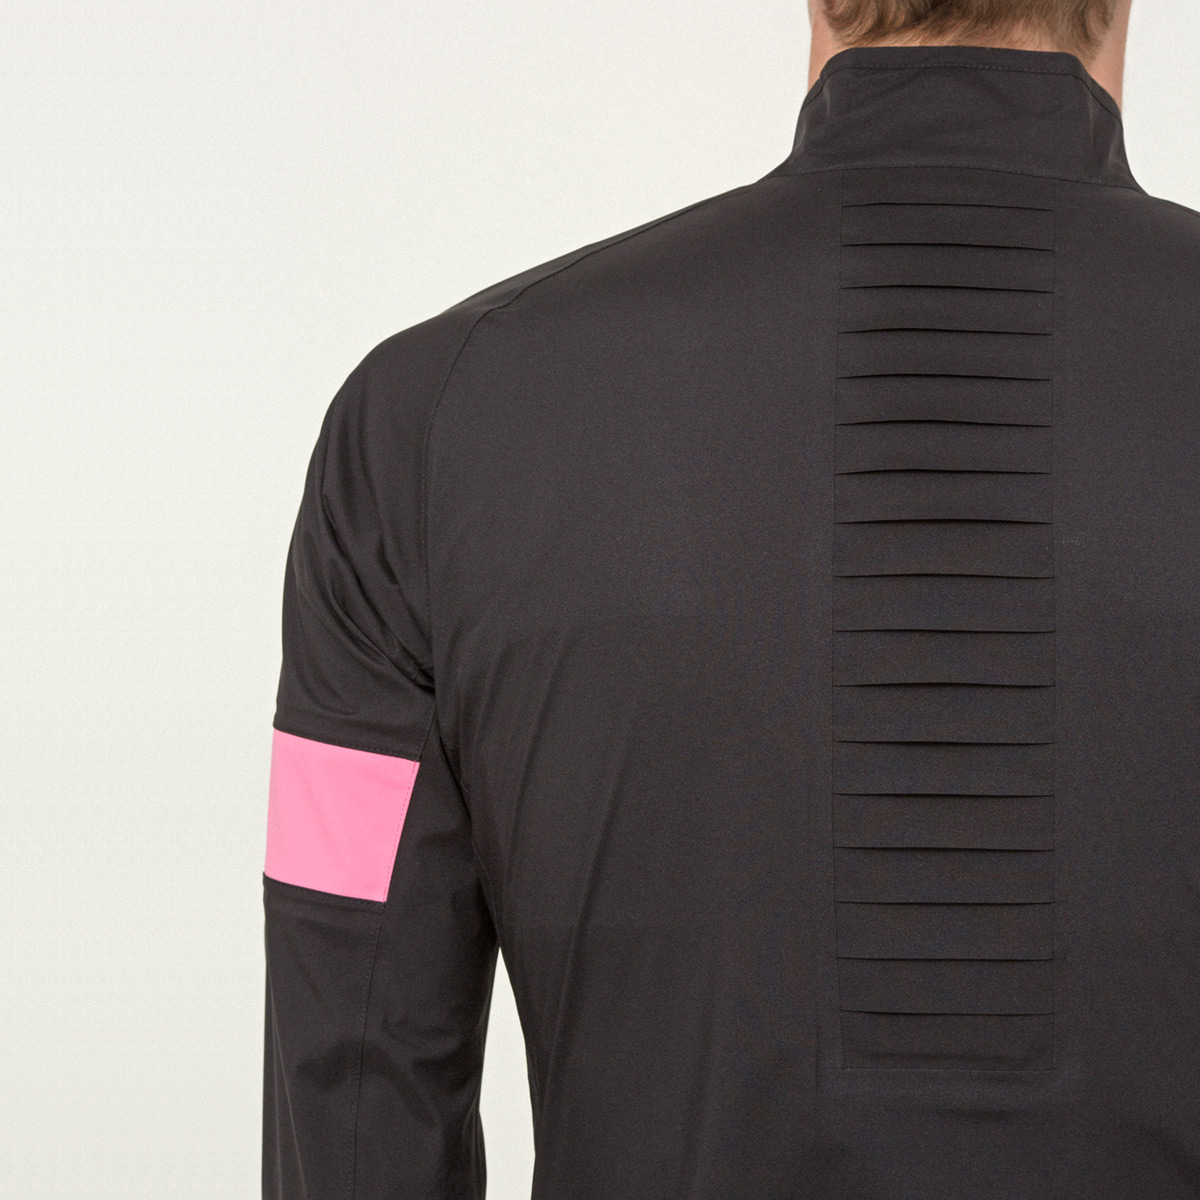 Rapha rolls out spring/summer gear with limited edition kit & across the board bib short updates